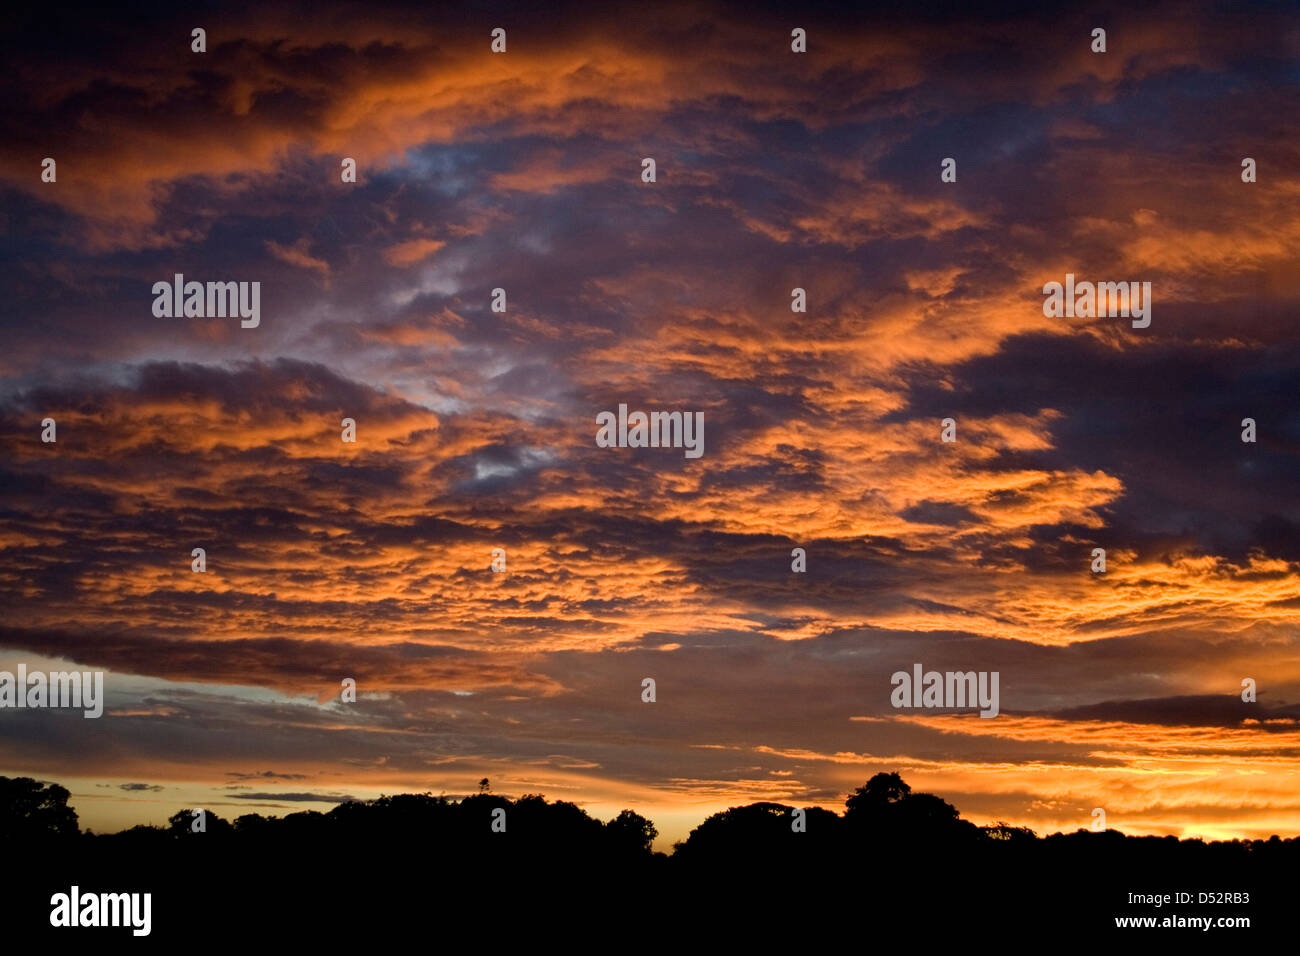 Sunset over Yorkshire Foto Stock